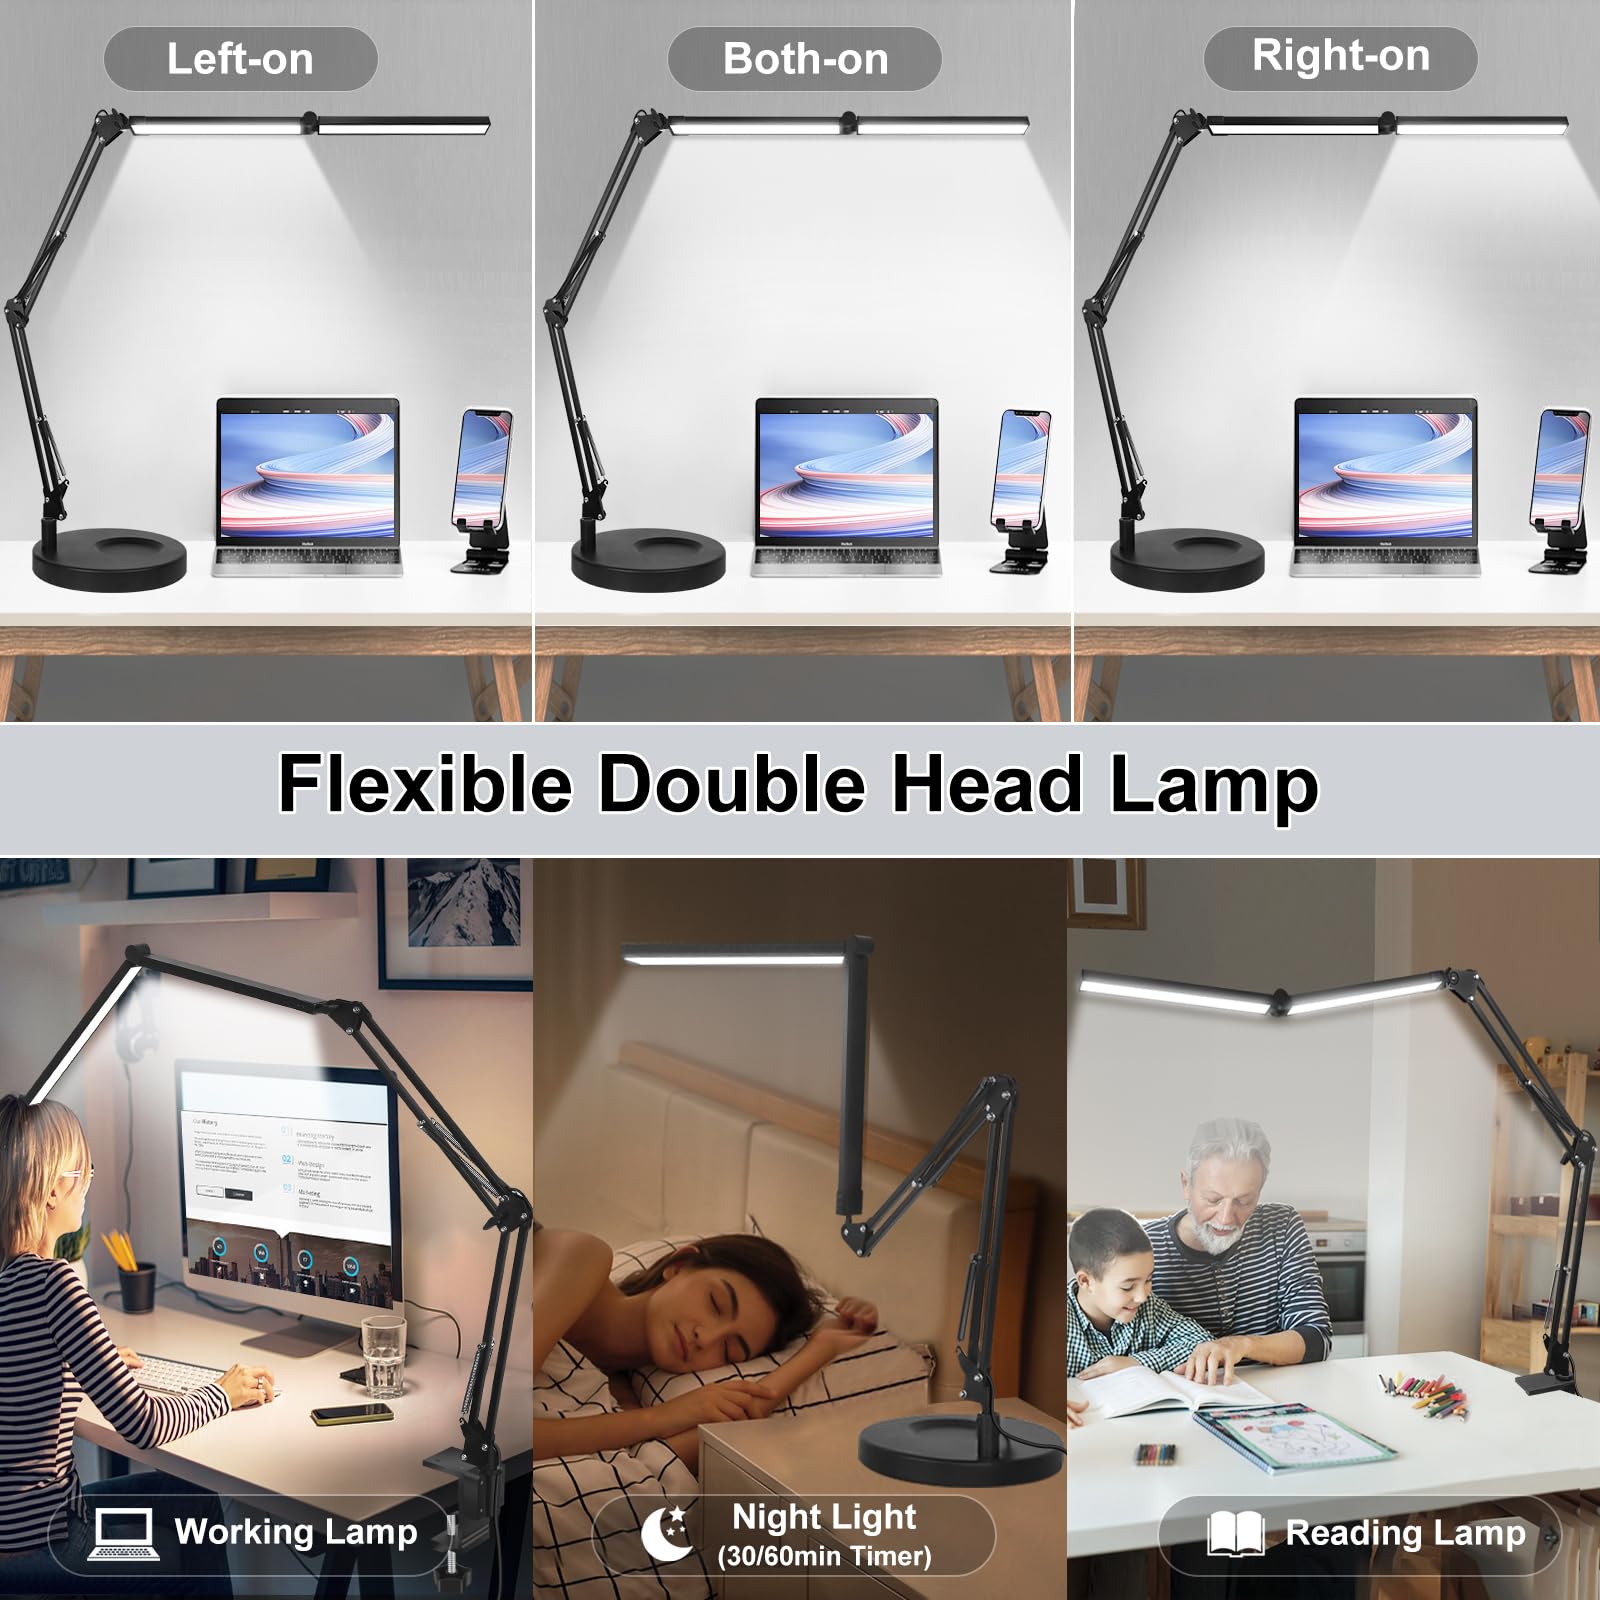 2-in-1 Desk Lamps for Home Office, 24W Large LED Desk Lamp with Remote Control, Double Head Computer Desk Lamp with Sleep Mode, 5 Colors Stepless Dimming Architect Workbench Light with Memory Function